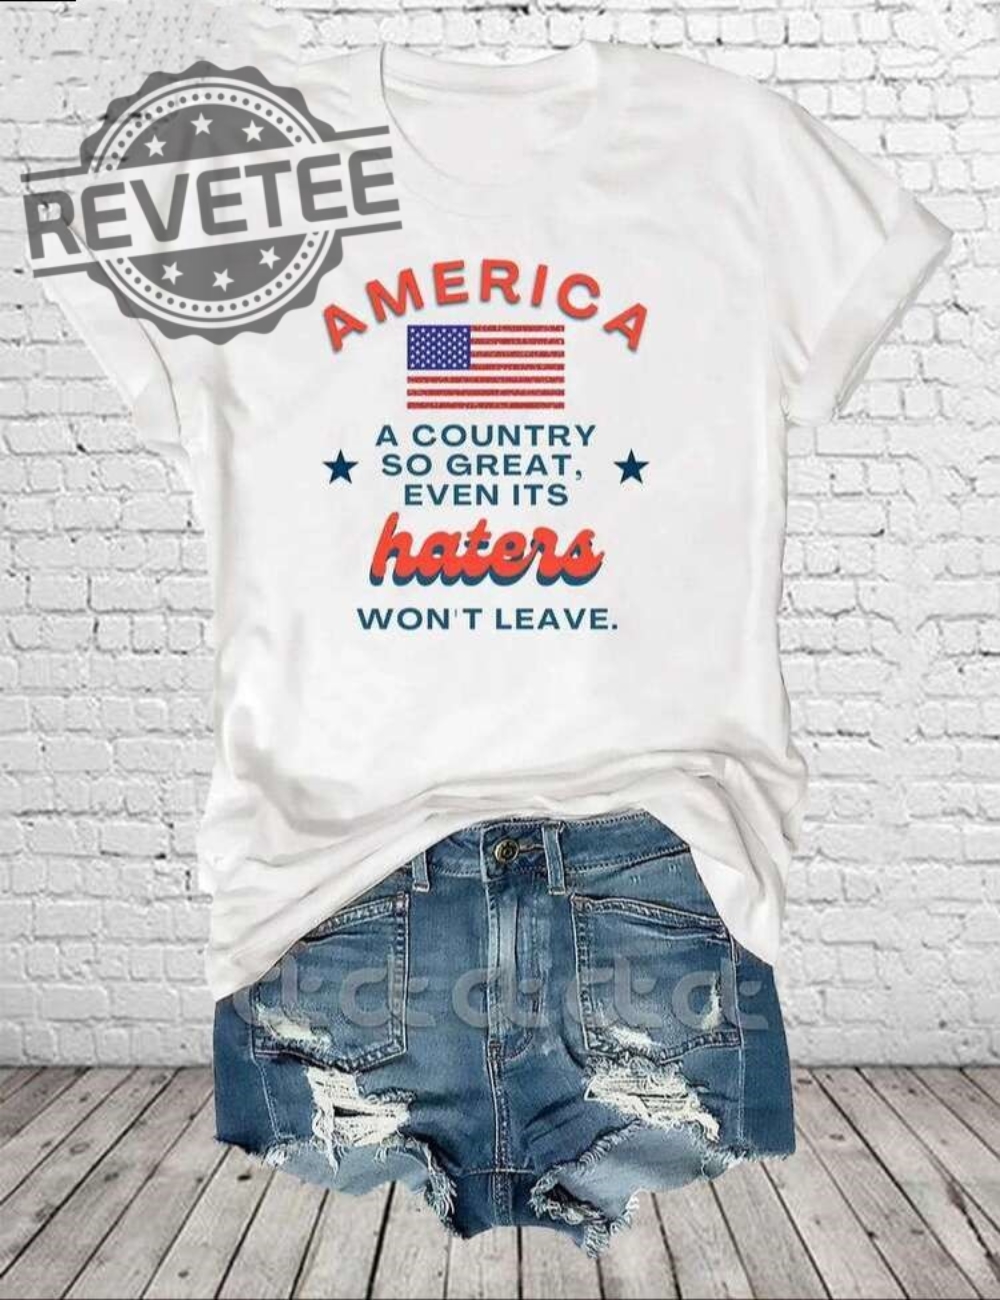 America A Country So Great Even Its Haters Wont Leave Shirt Hoodie Long Sleeve Shirt Sweatshirt Tanktop Unique